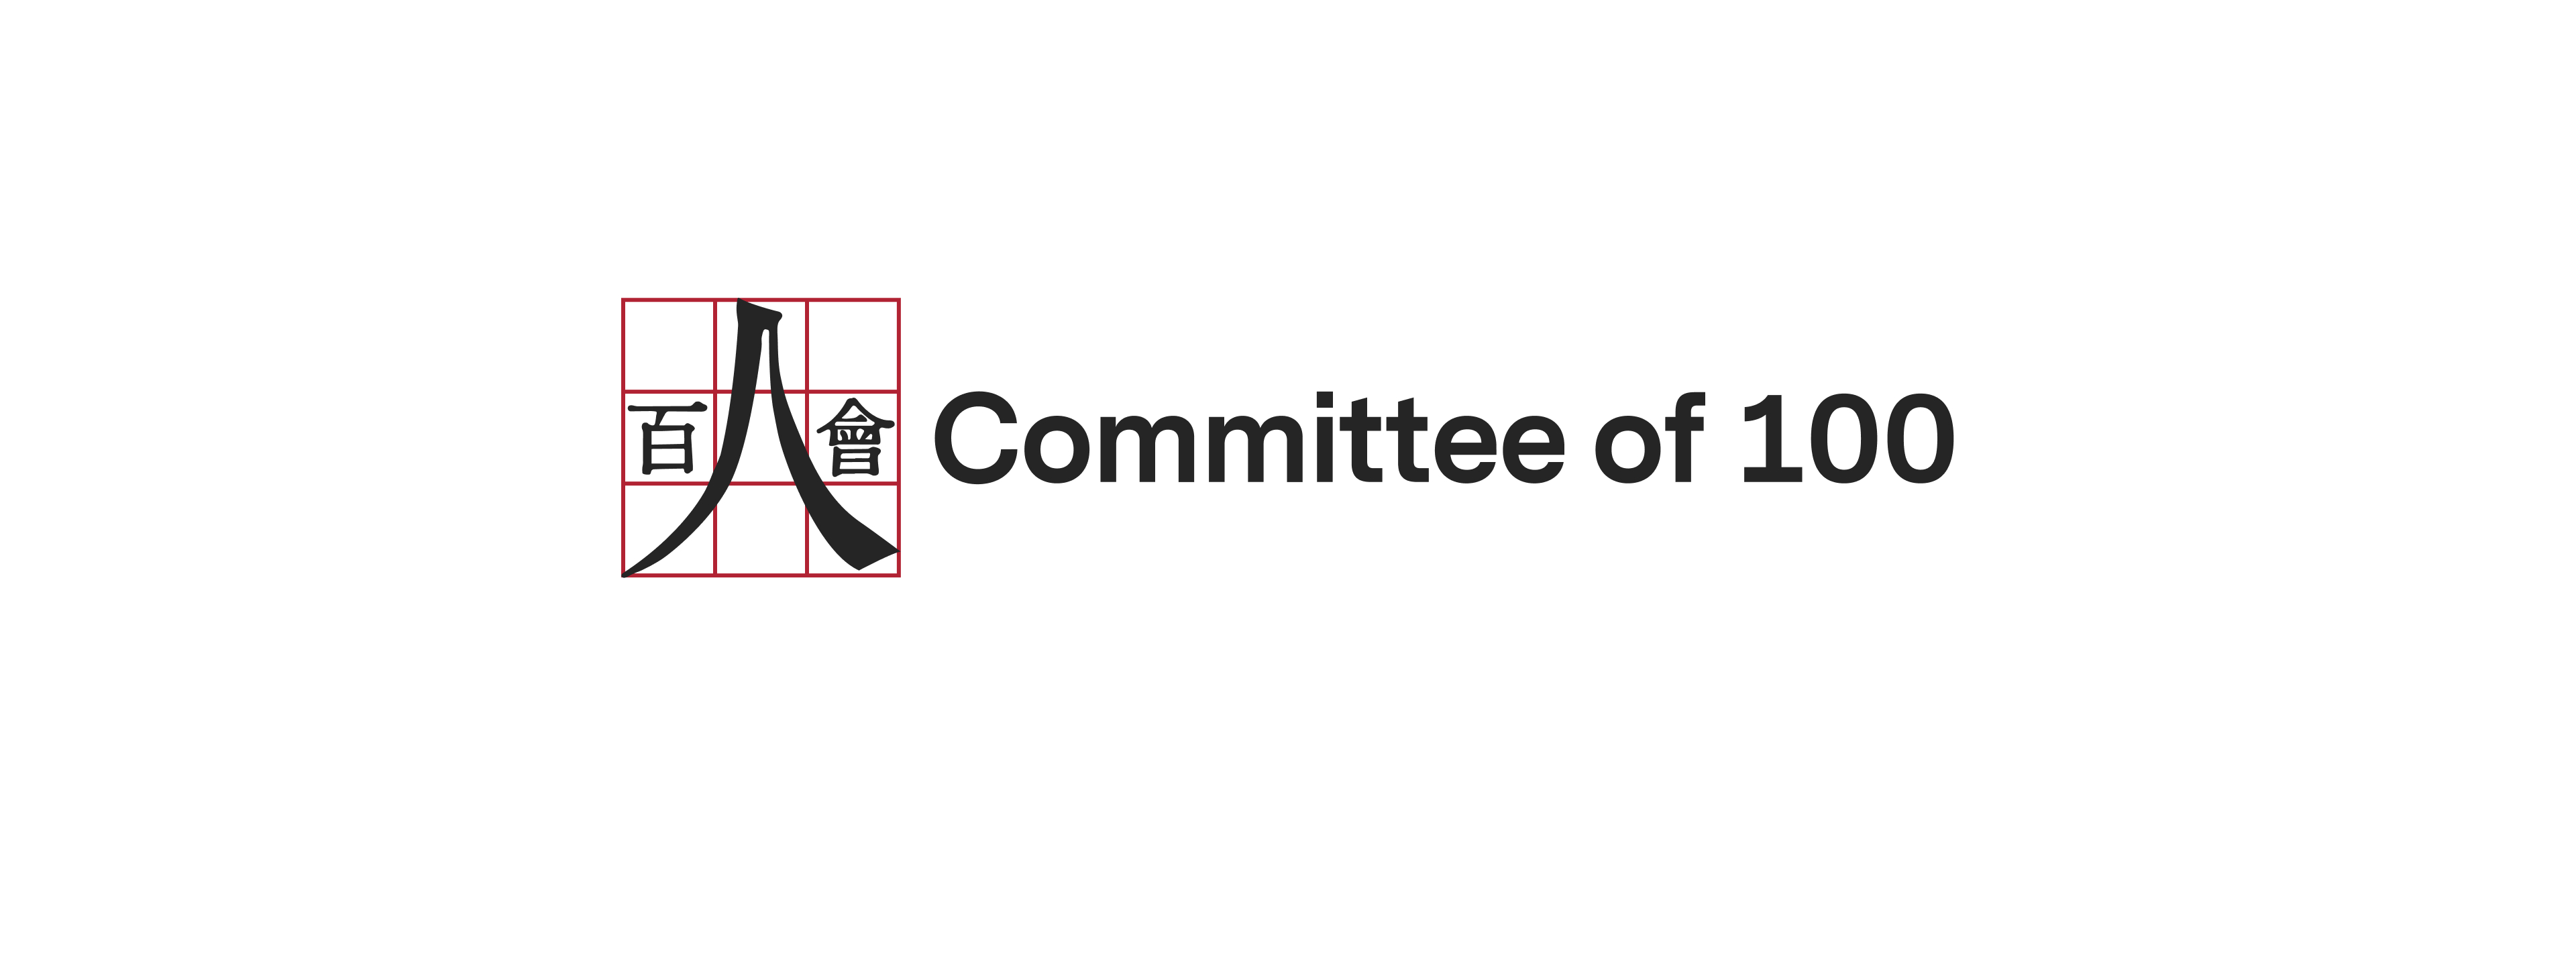 Committee of 100 Names John S. Chen as Chairman